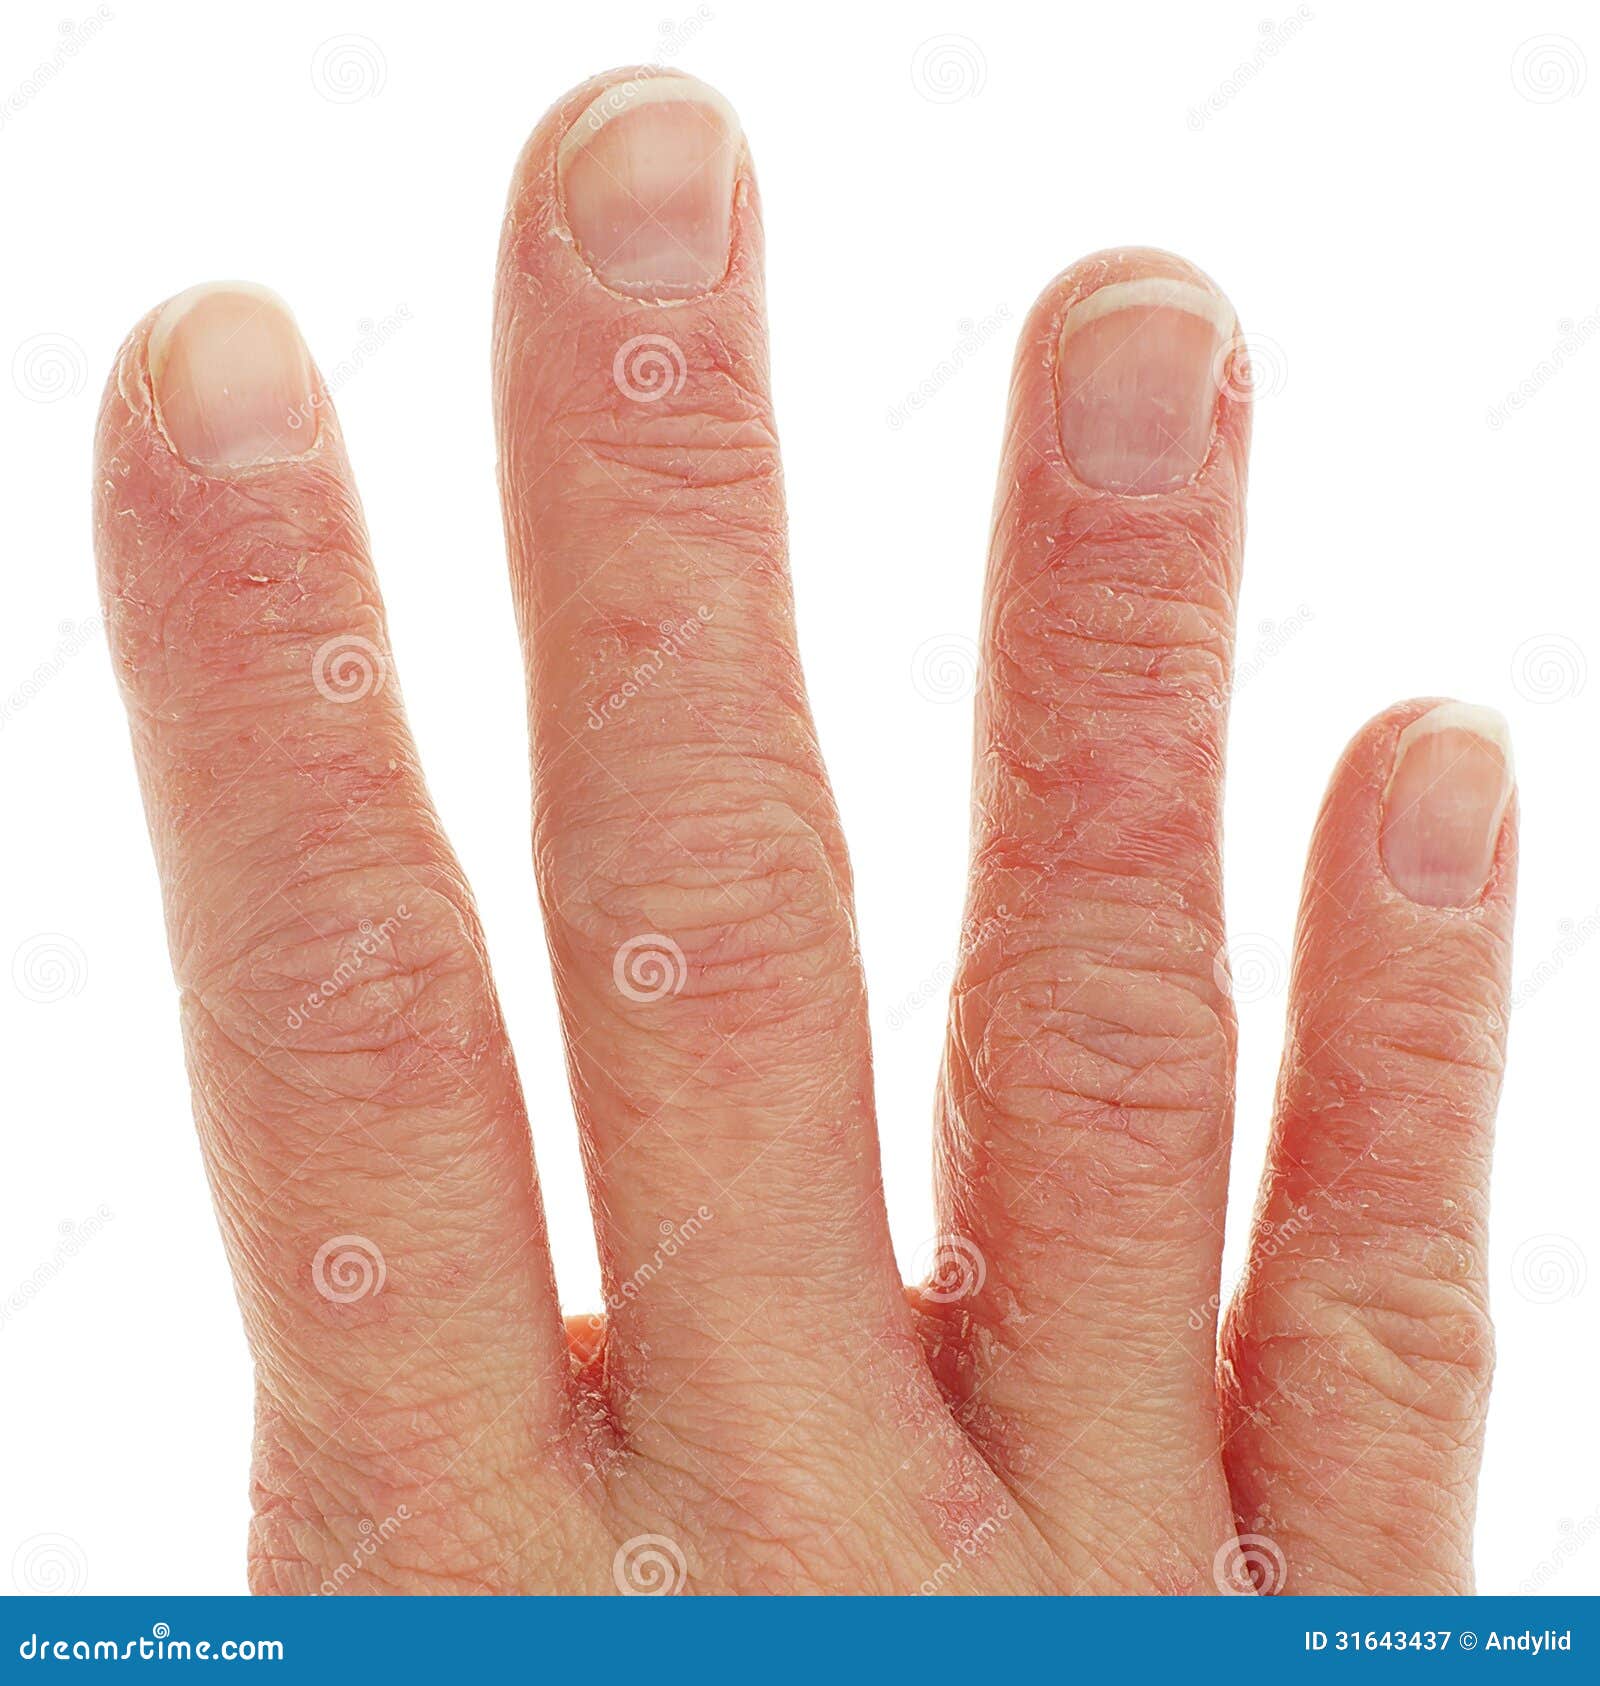 pictures of contact dermatitis #10